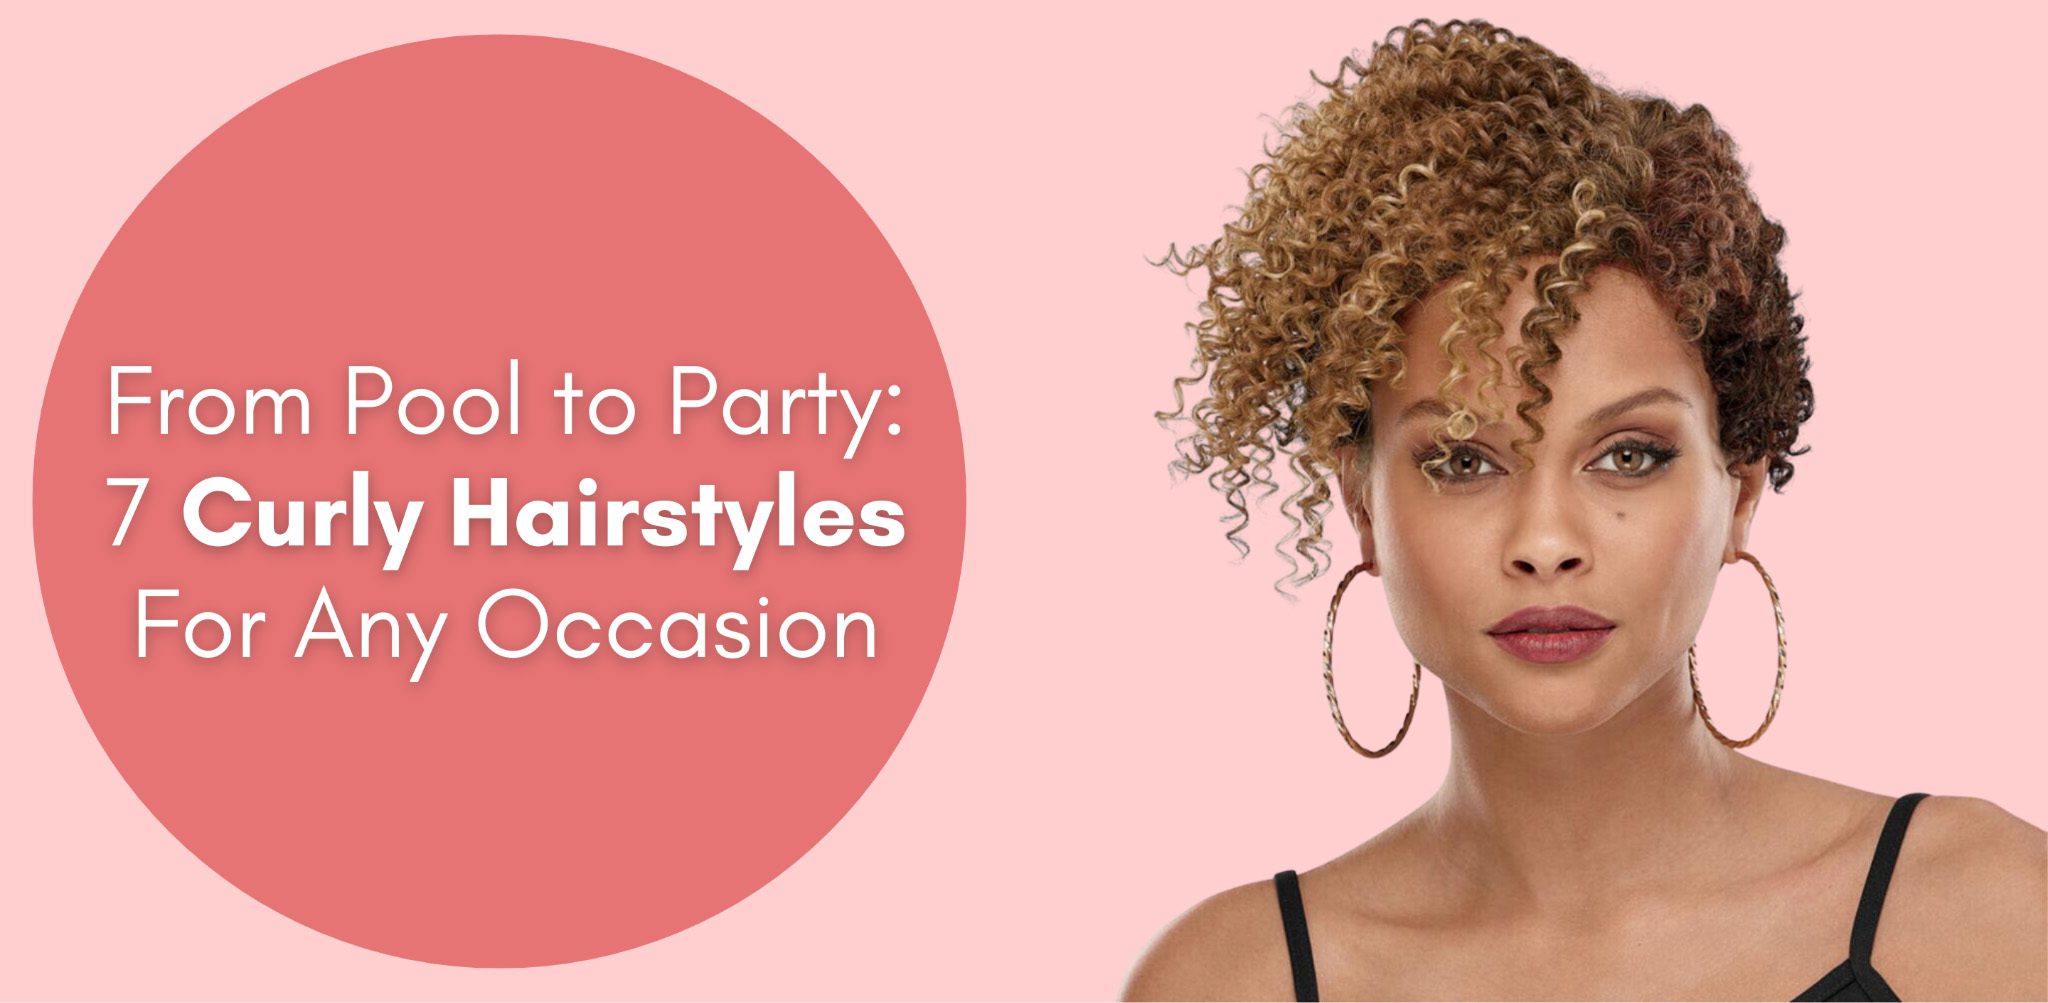 From Pool to Party: 7 Curly Hairstyles For Any Occasion